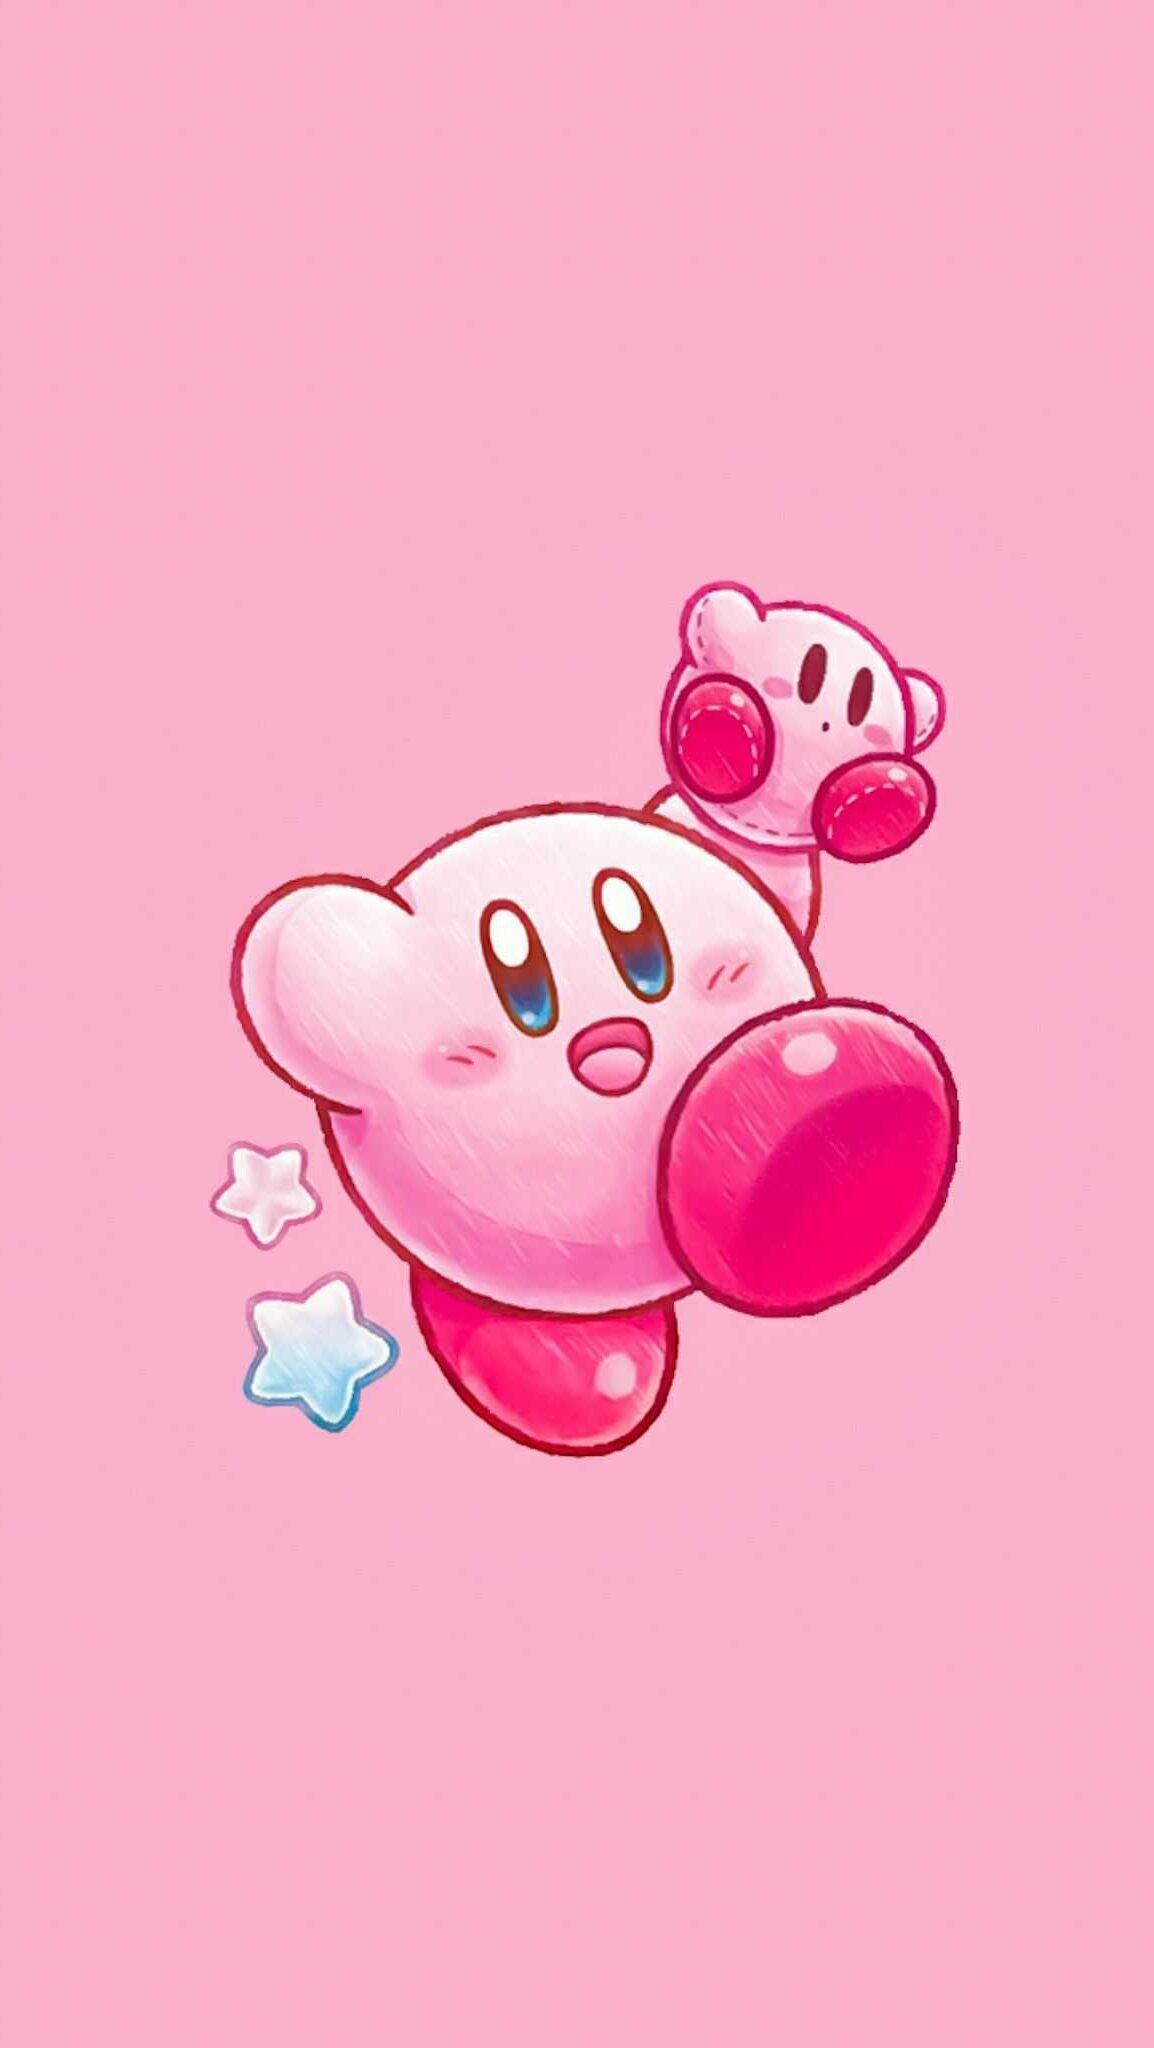 3266x1837 / Super Smash Bros. Ultimate, Kirby wallpaper - Coolwallpapers.me!